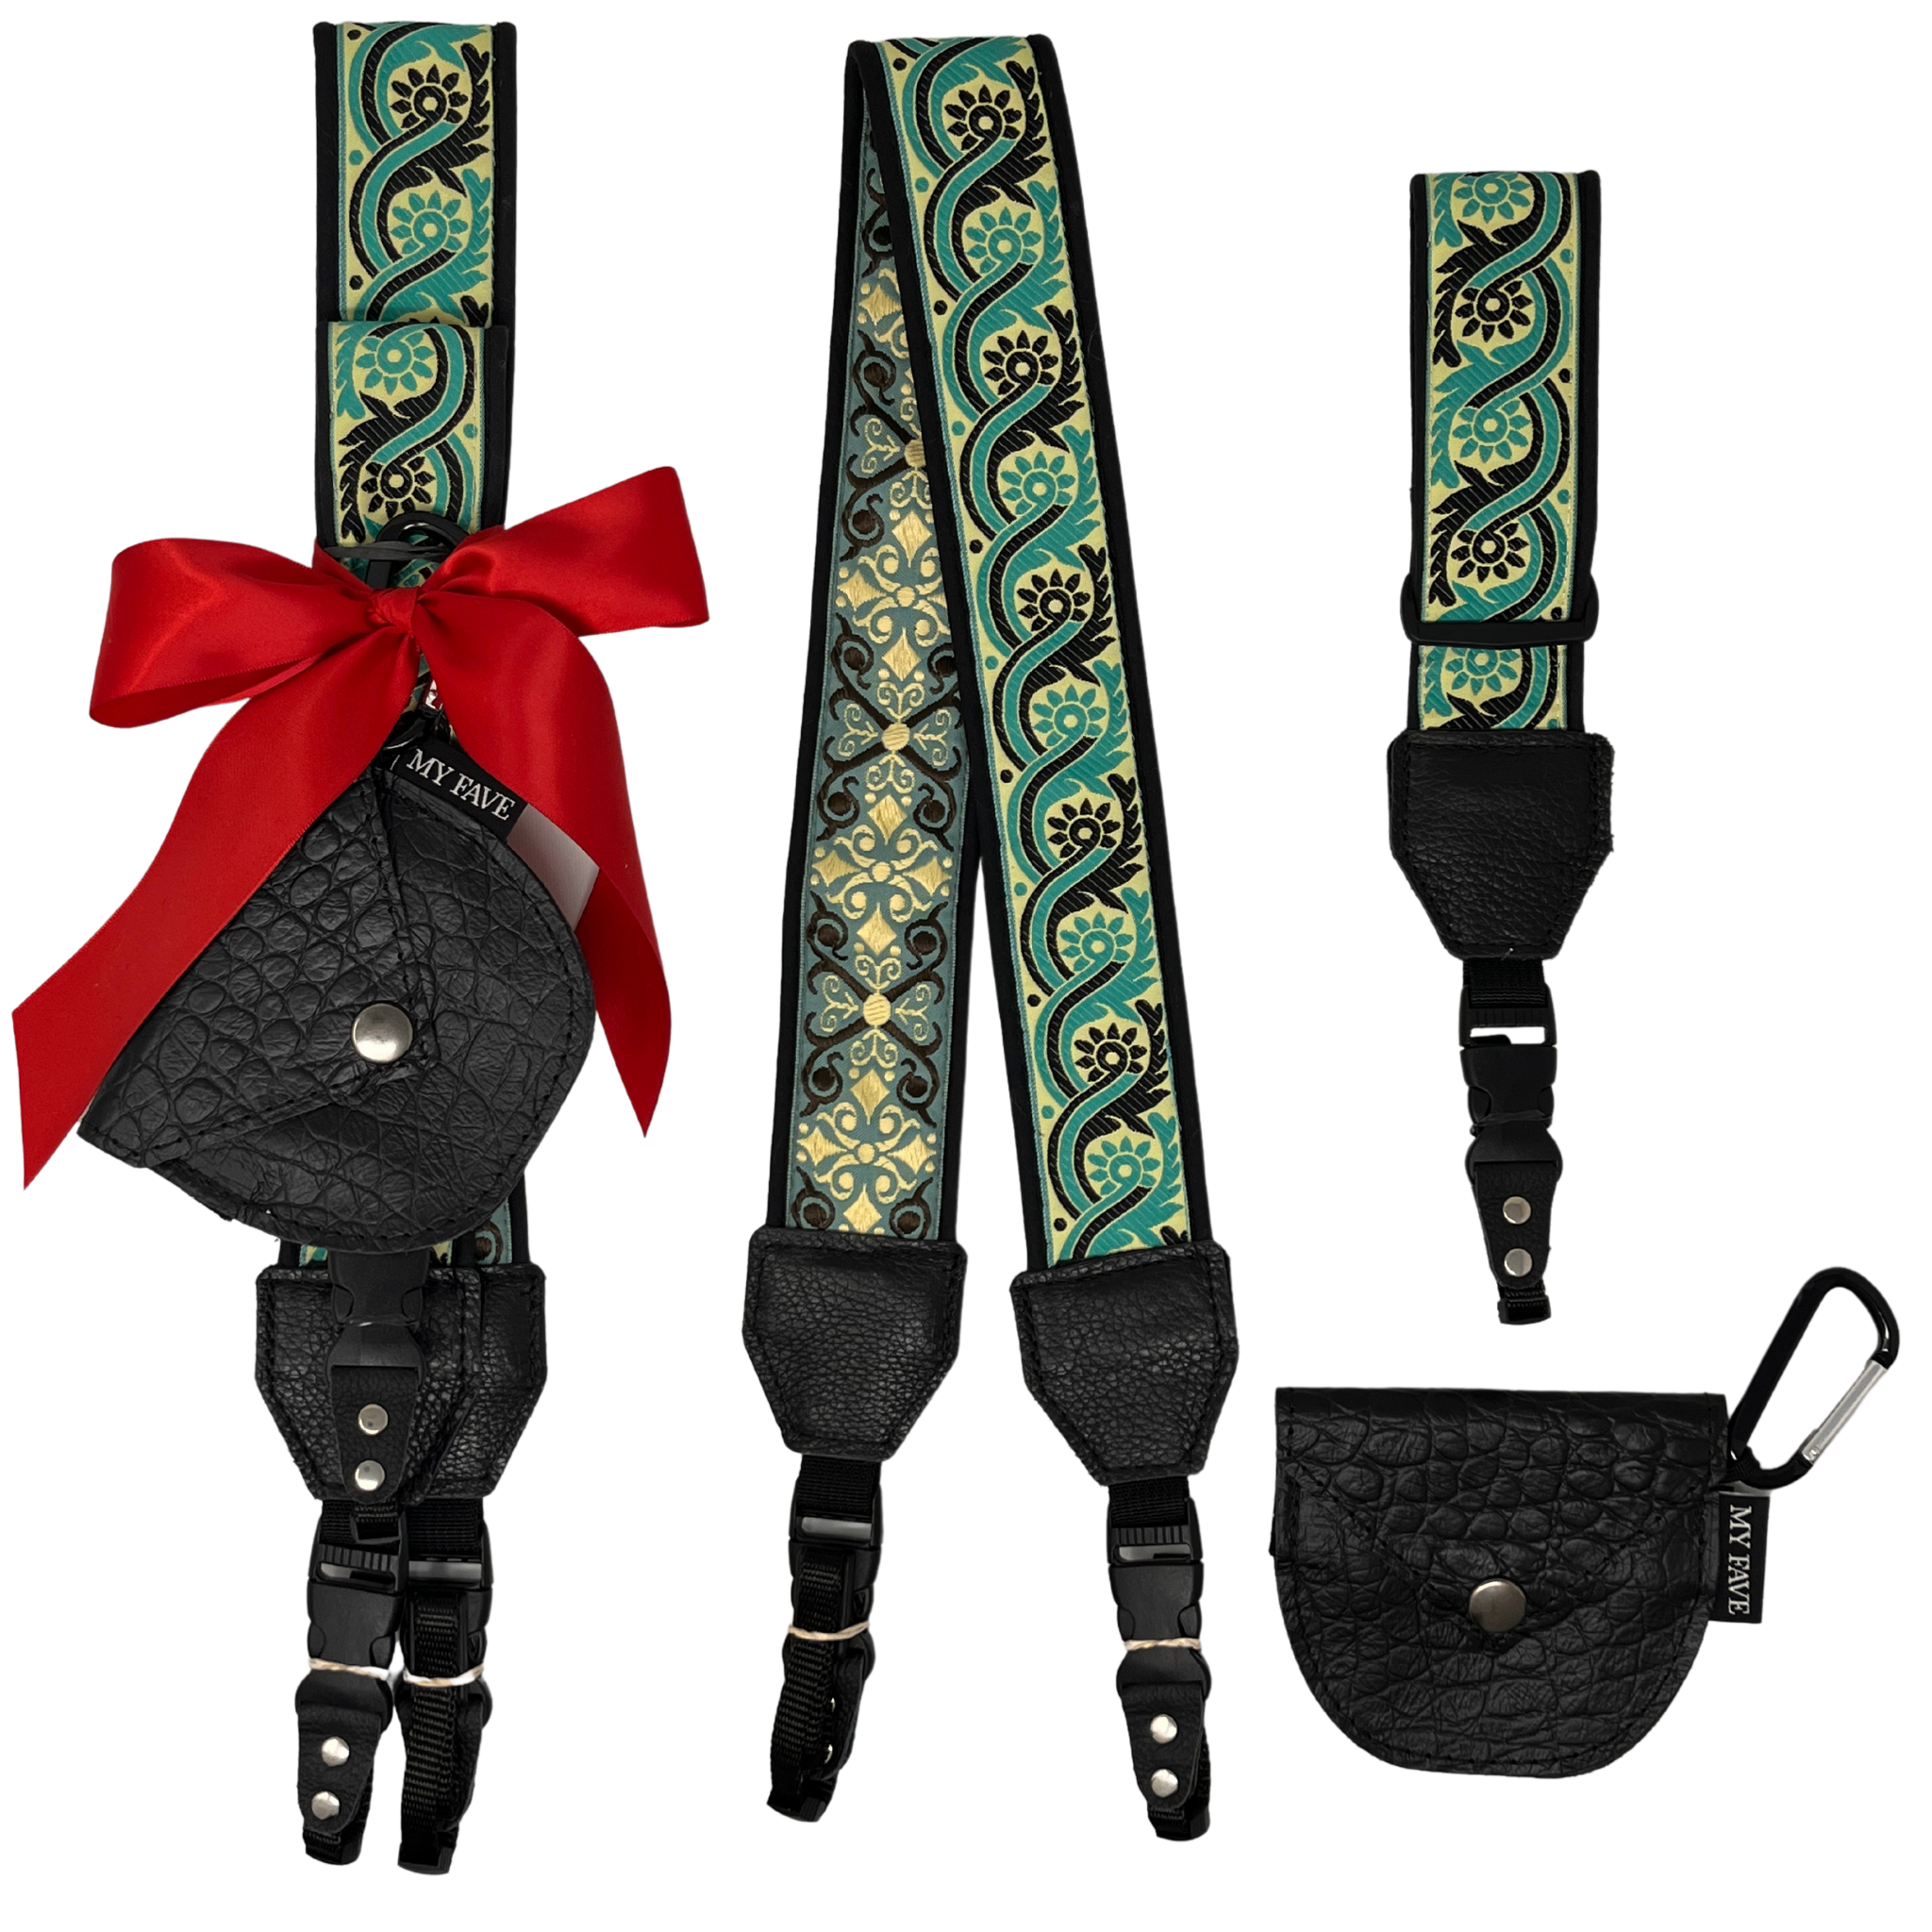 Camera Strap Gift Set - Birds of a Feather